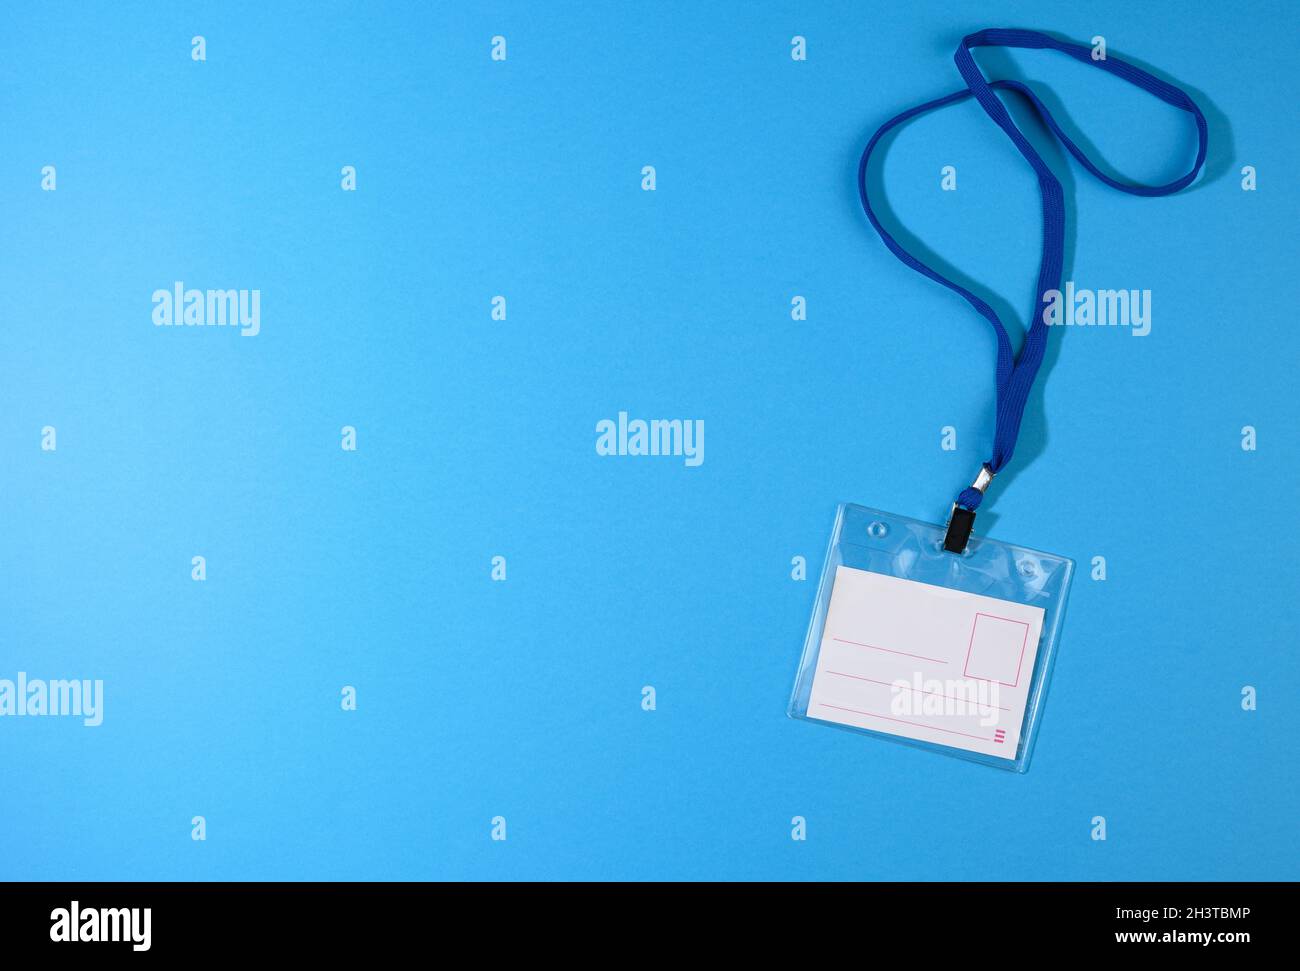 Transparent plastic badge on a blue lanyard on a blue background Stock Photo